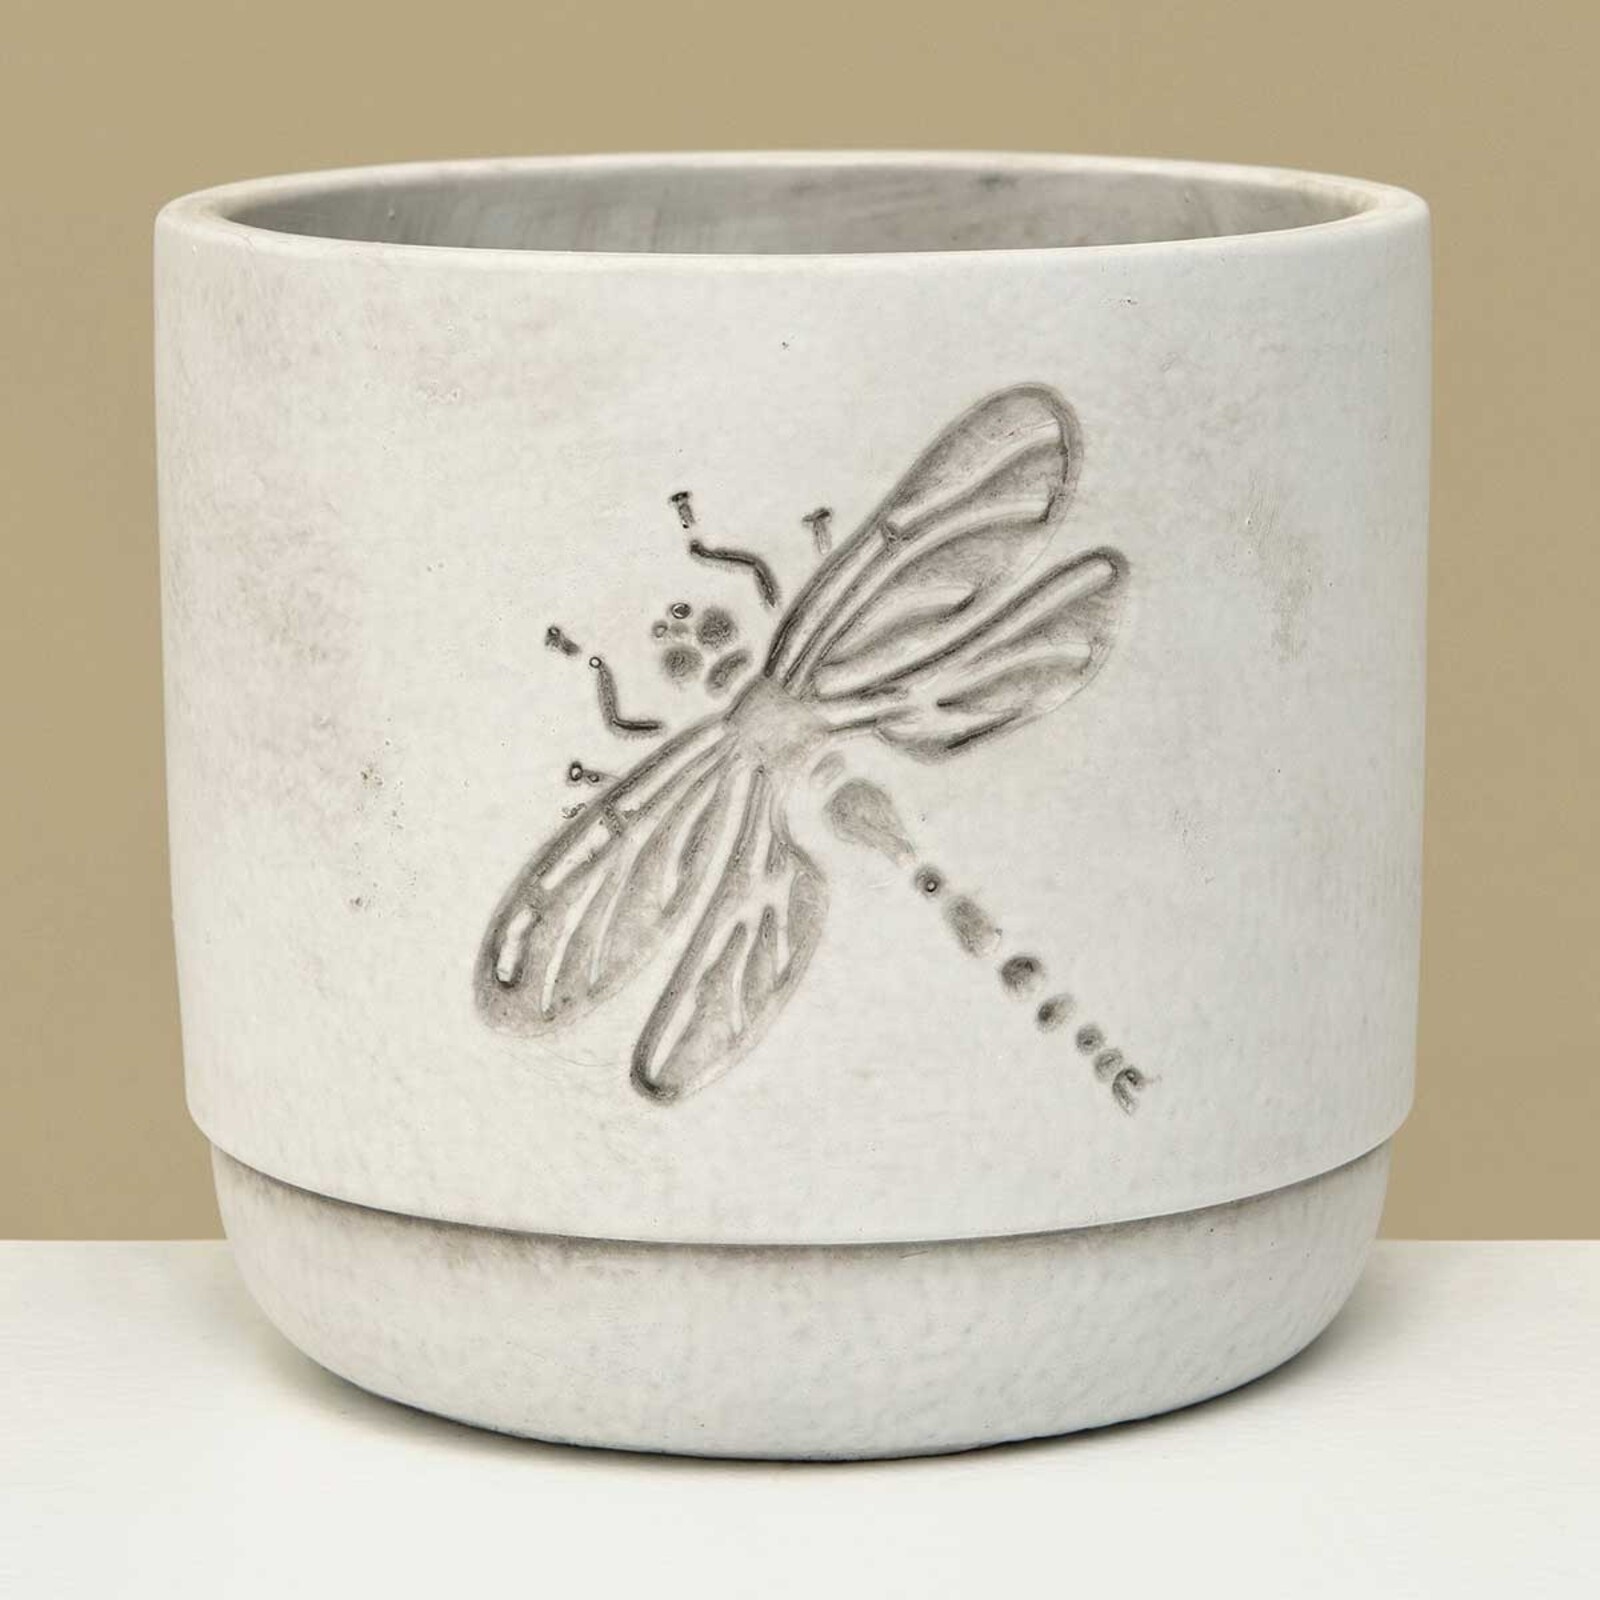 Meravic POT DRAGONFLY WHITE WASH LARGE 5.5IN X 5IN CONCRETE   A3564 loading=